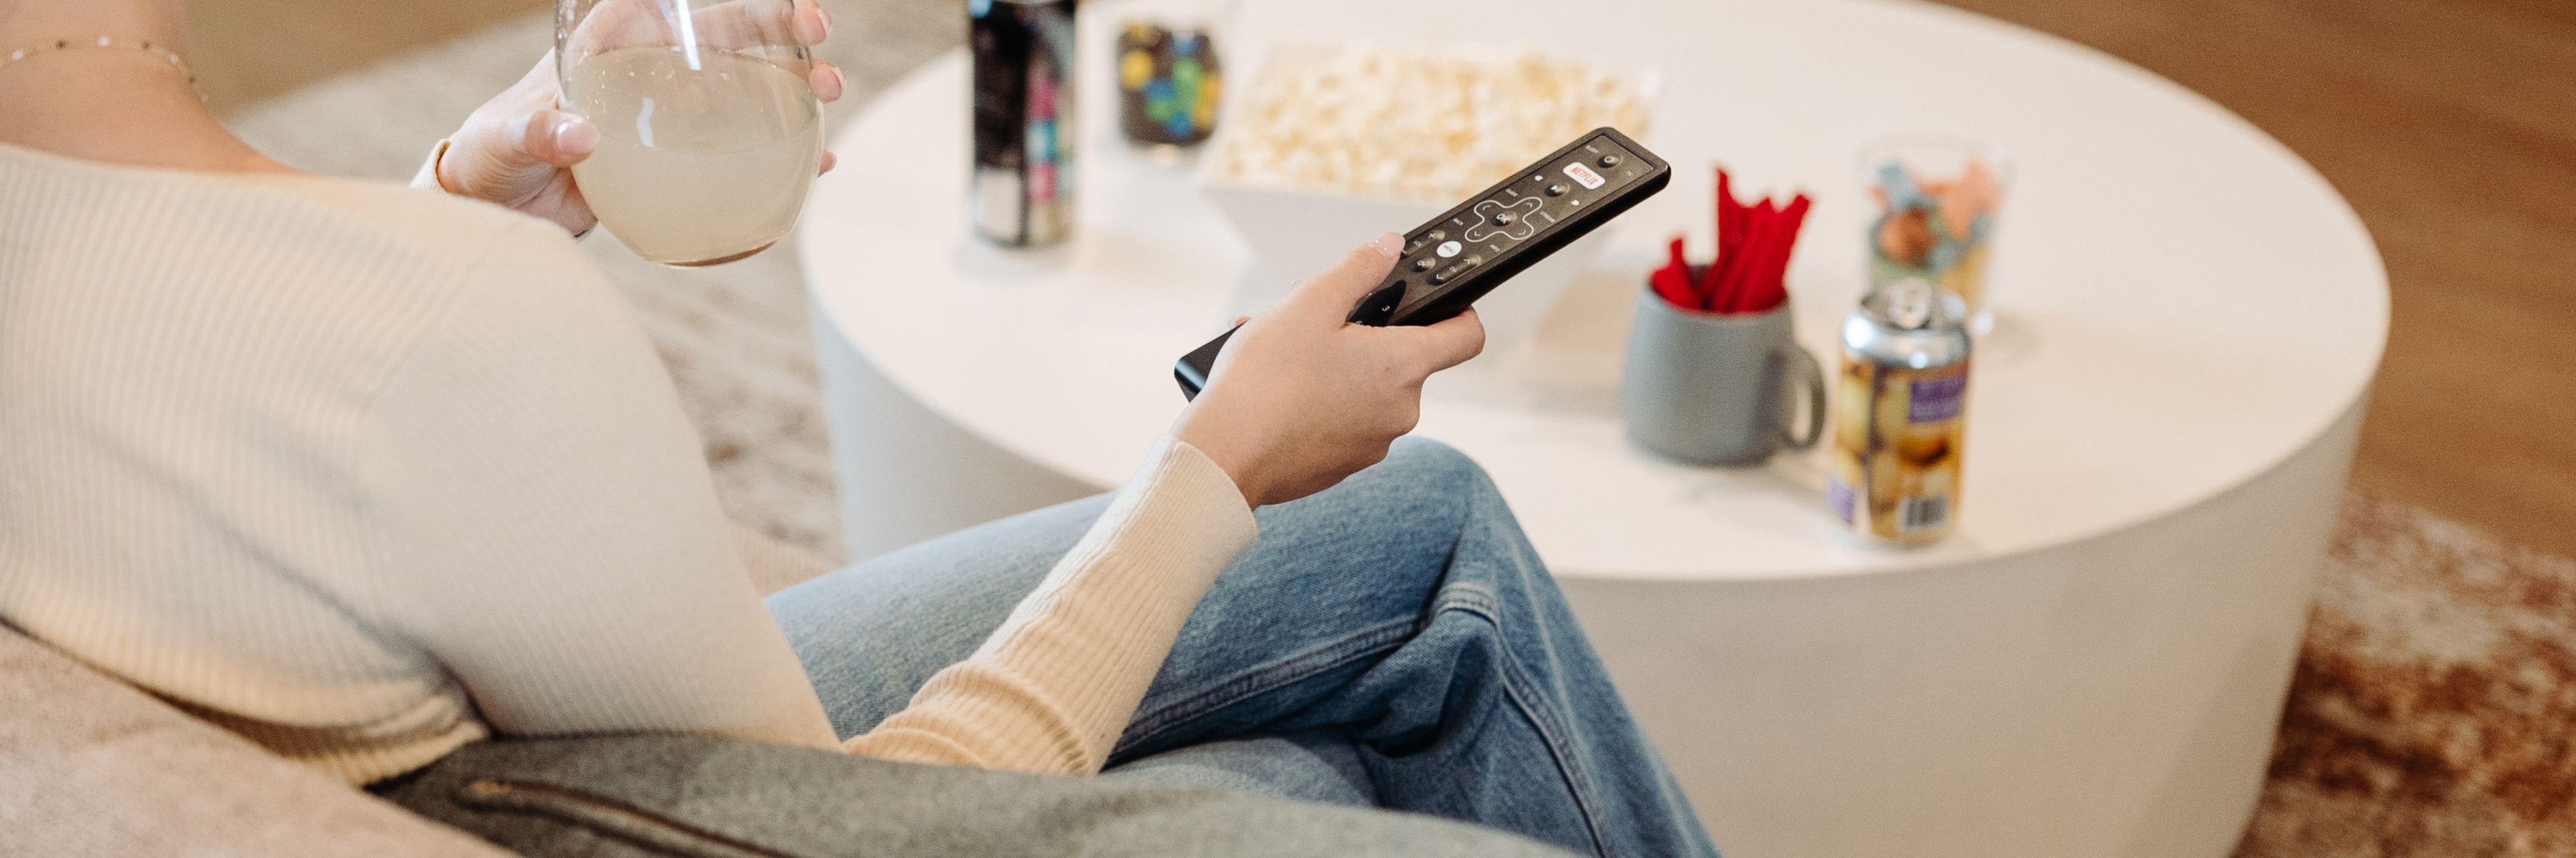 Person sitting on a couch with a drink and the television remote control